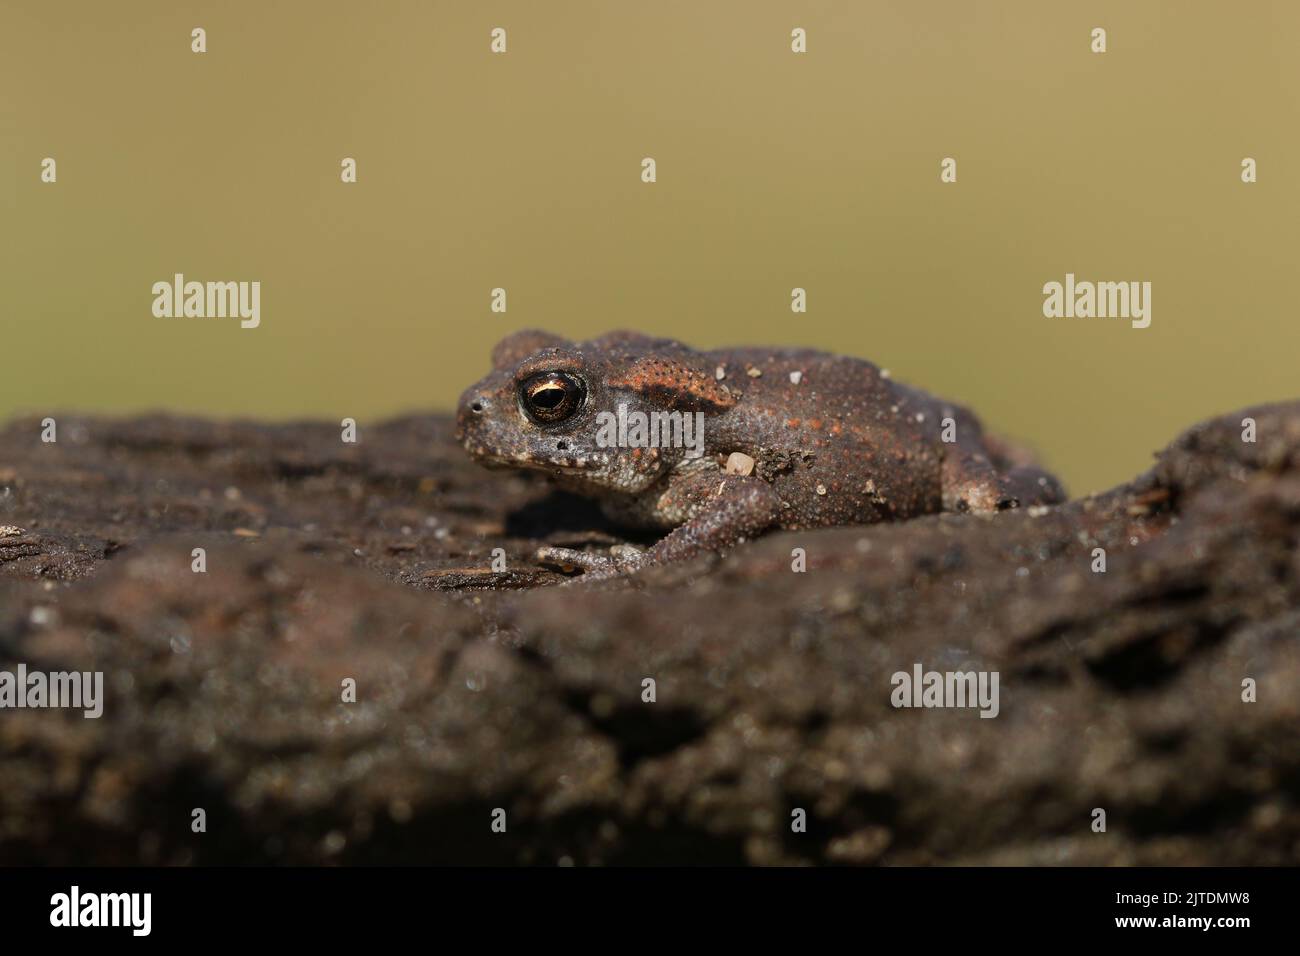 A cute tiny baby Common Toad, Bufo bufo, hunting for food at the edge of pond. Stock Photo